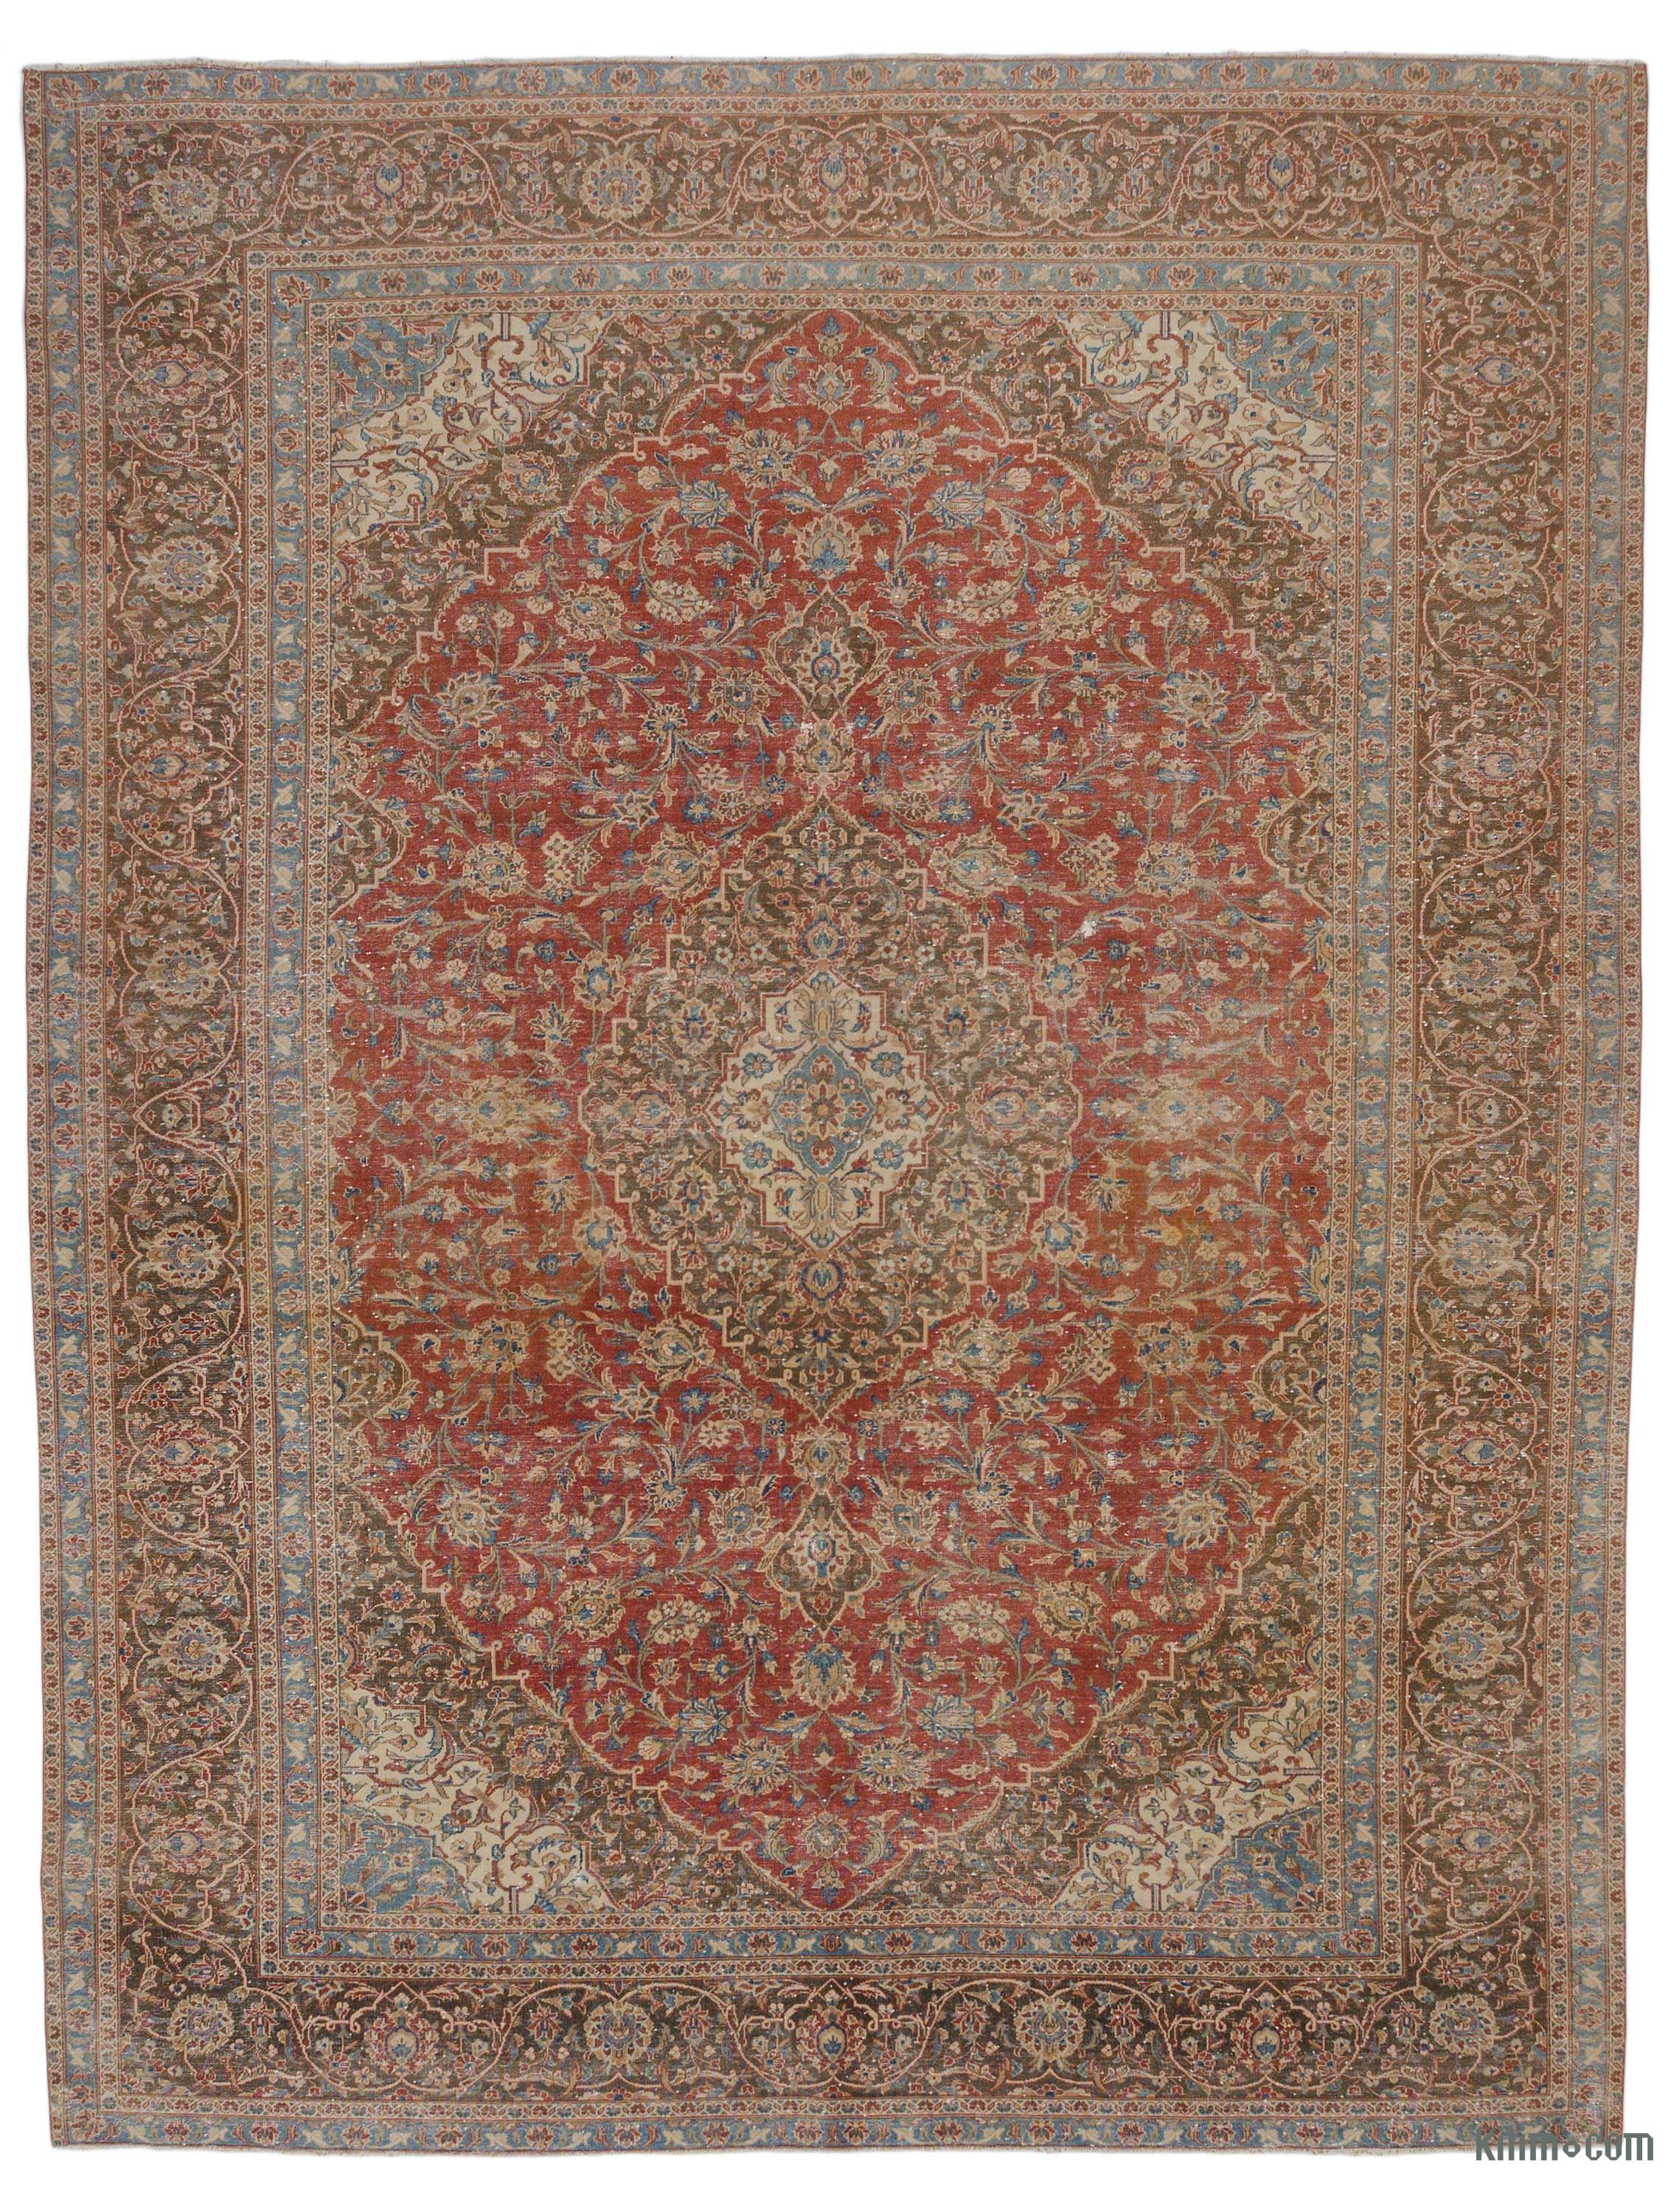 Vintage Hand Knotted Oriental Rug, 9 215 12 Area Rugs Contemporary